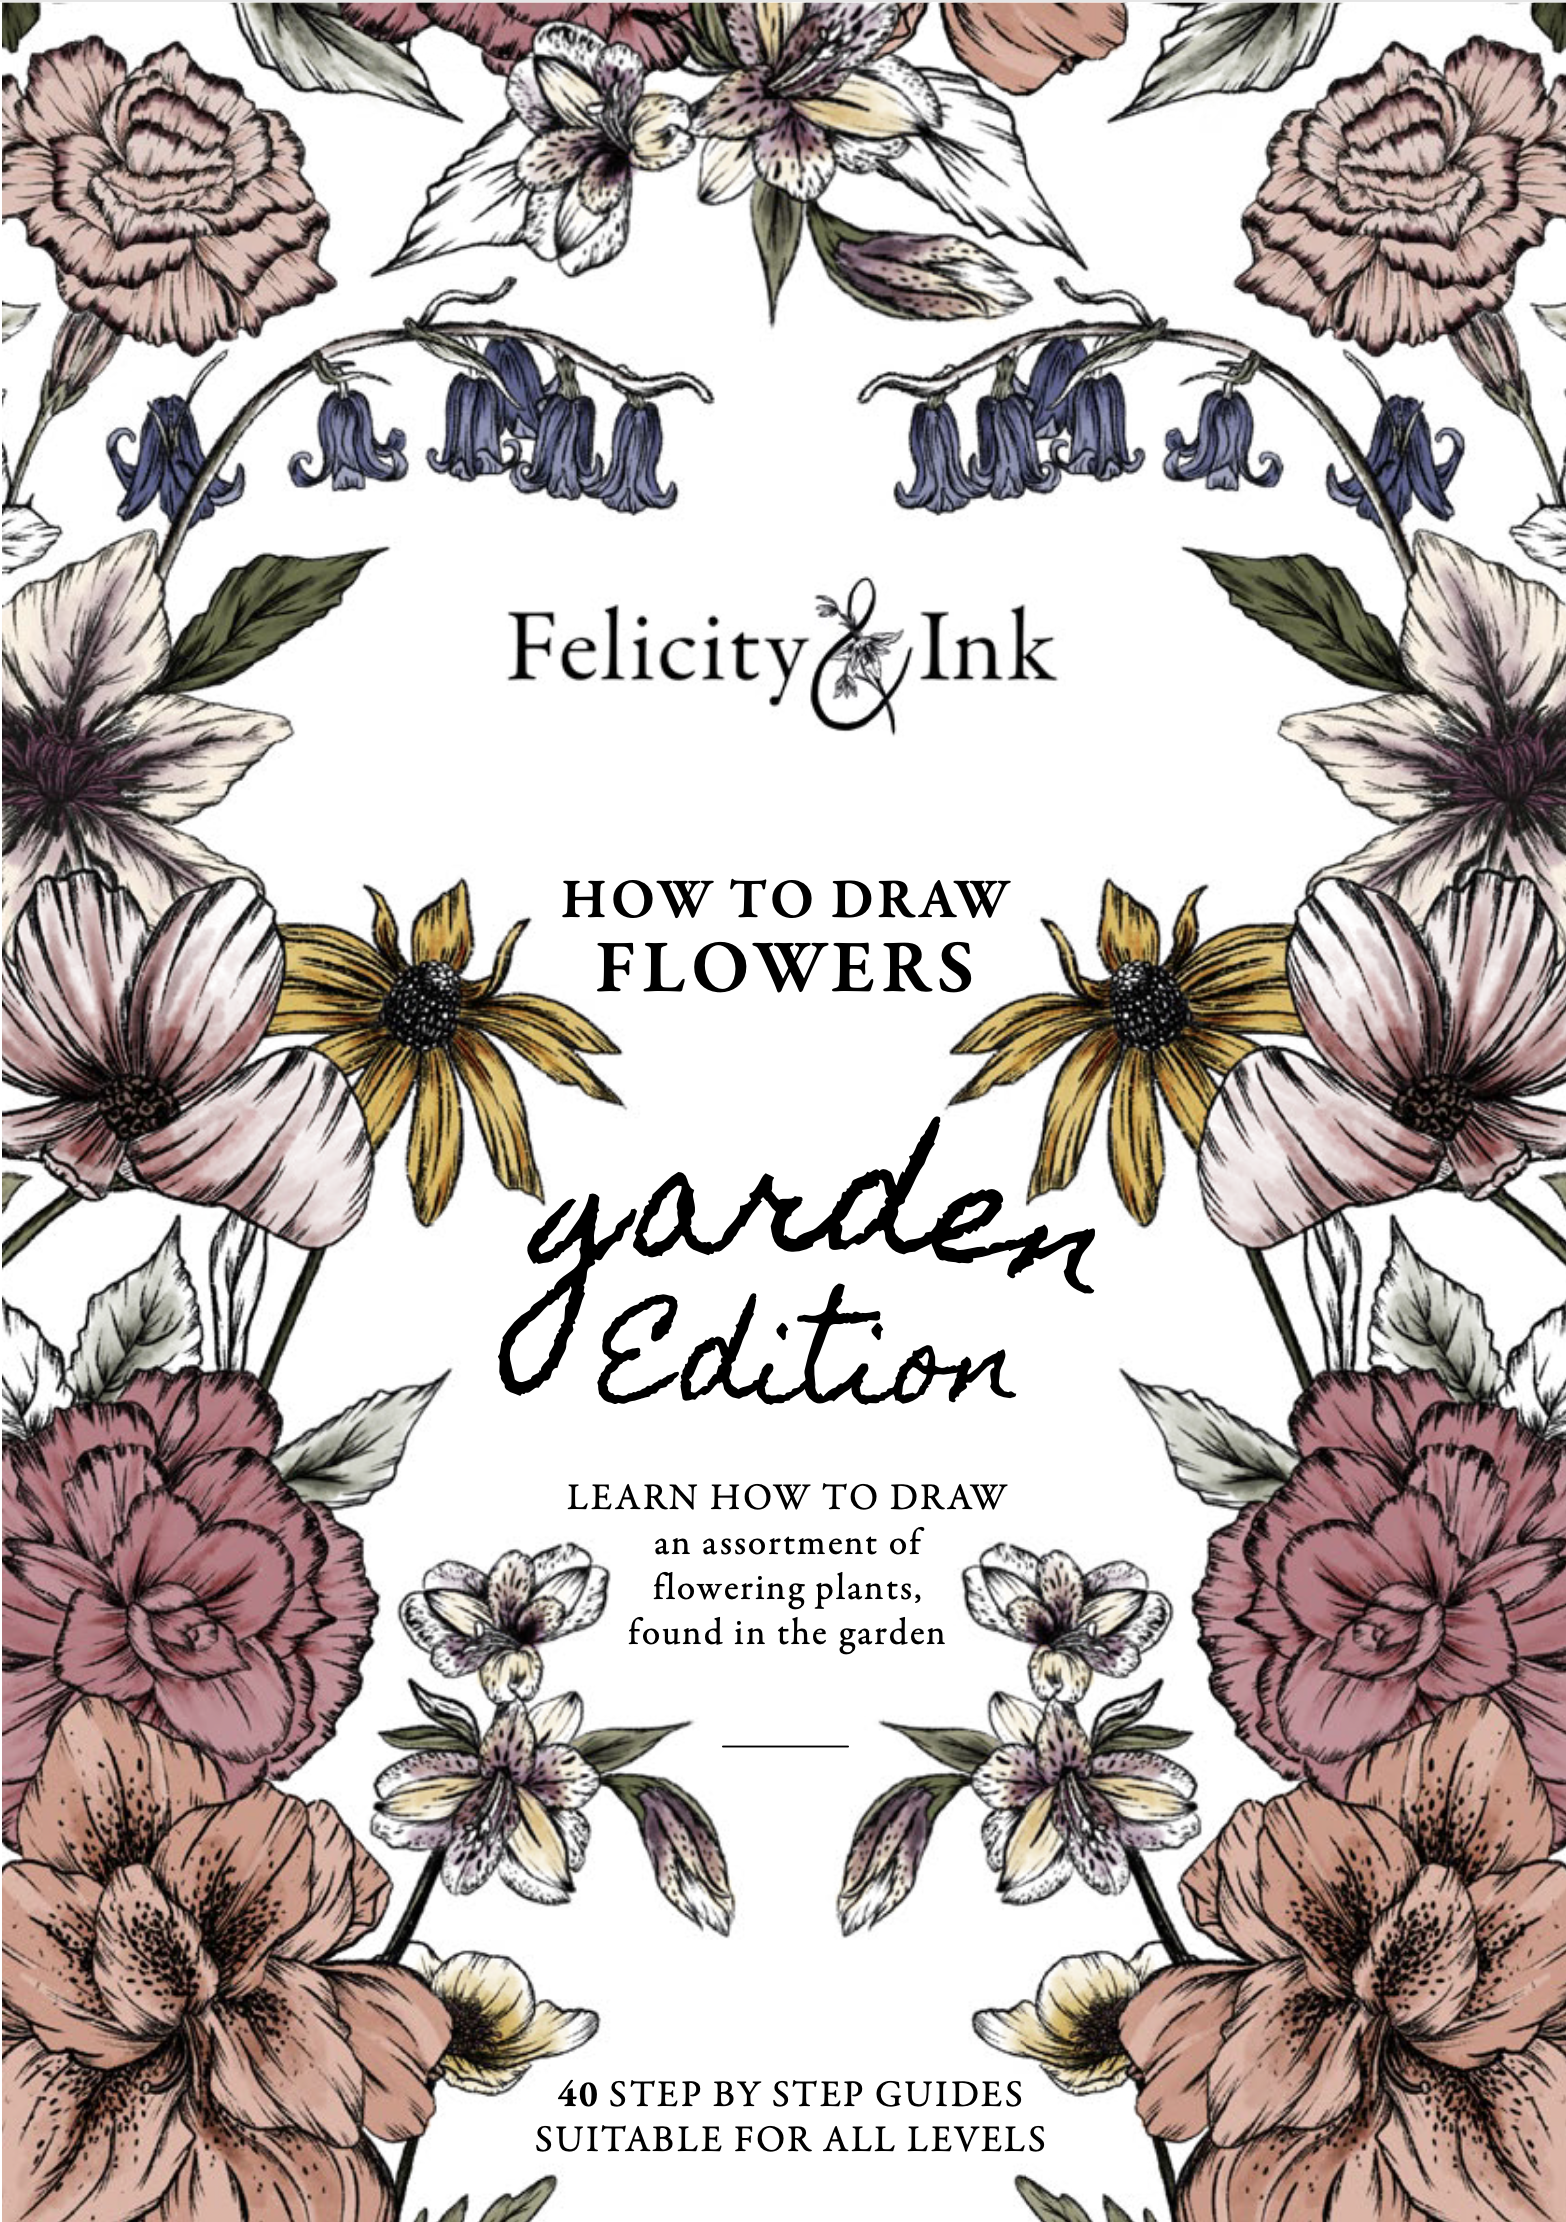 felicity-and-ink-how-to-draw-garden-flowers-step-by-step-ebook.jpg